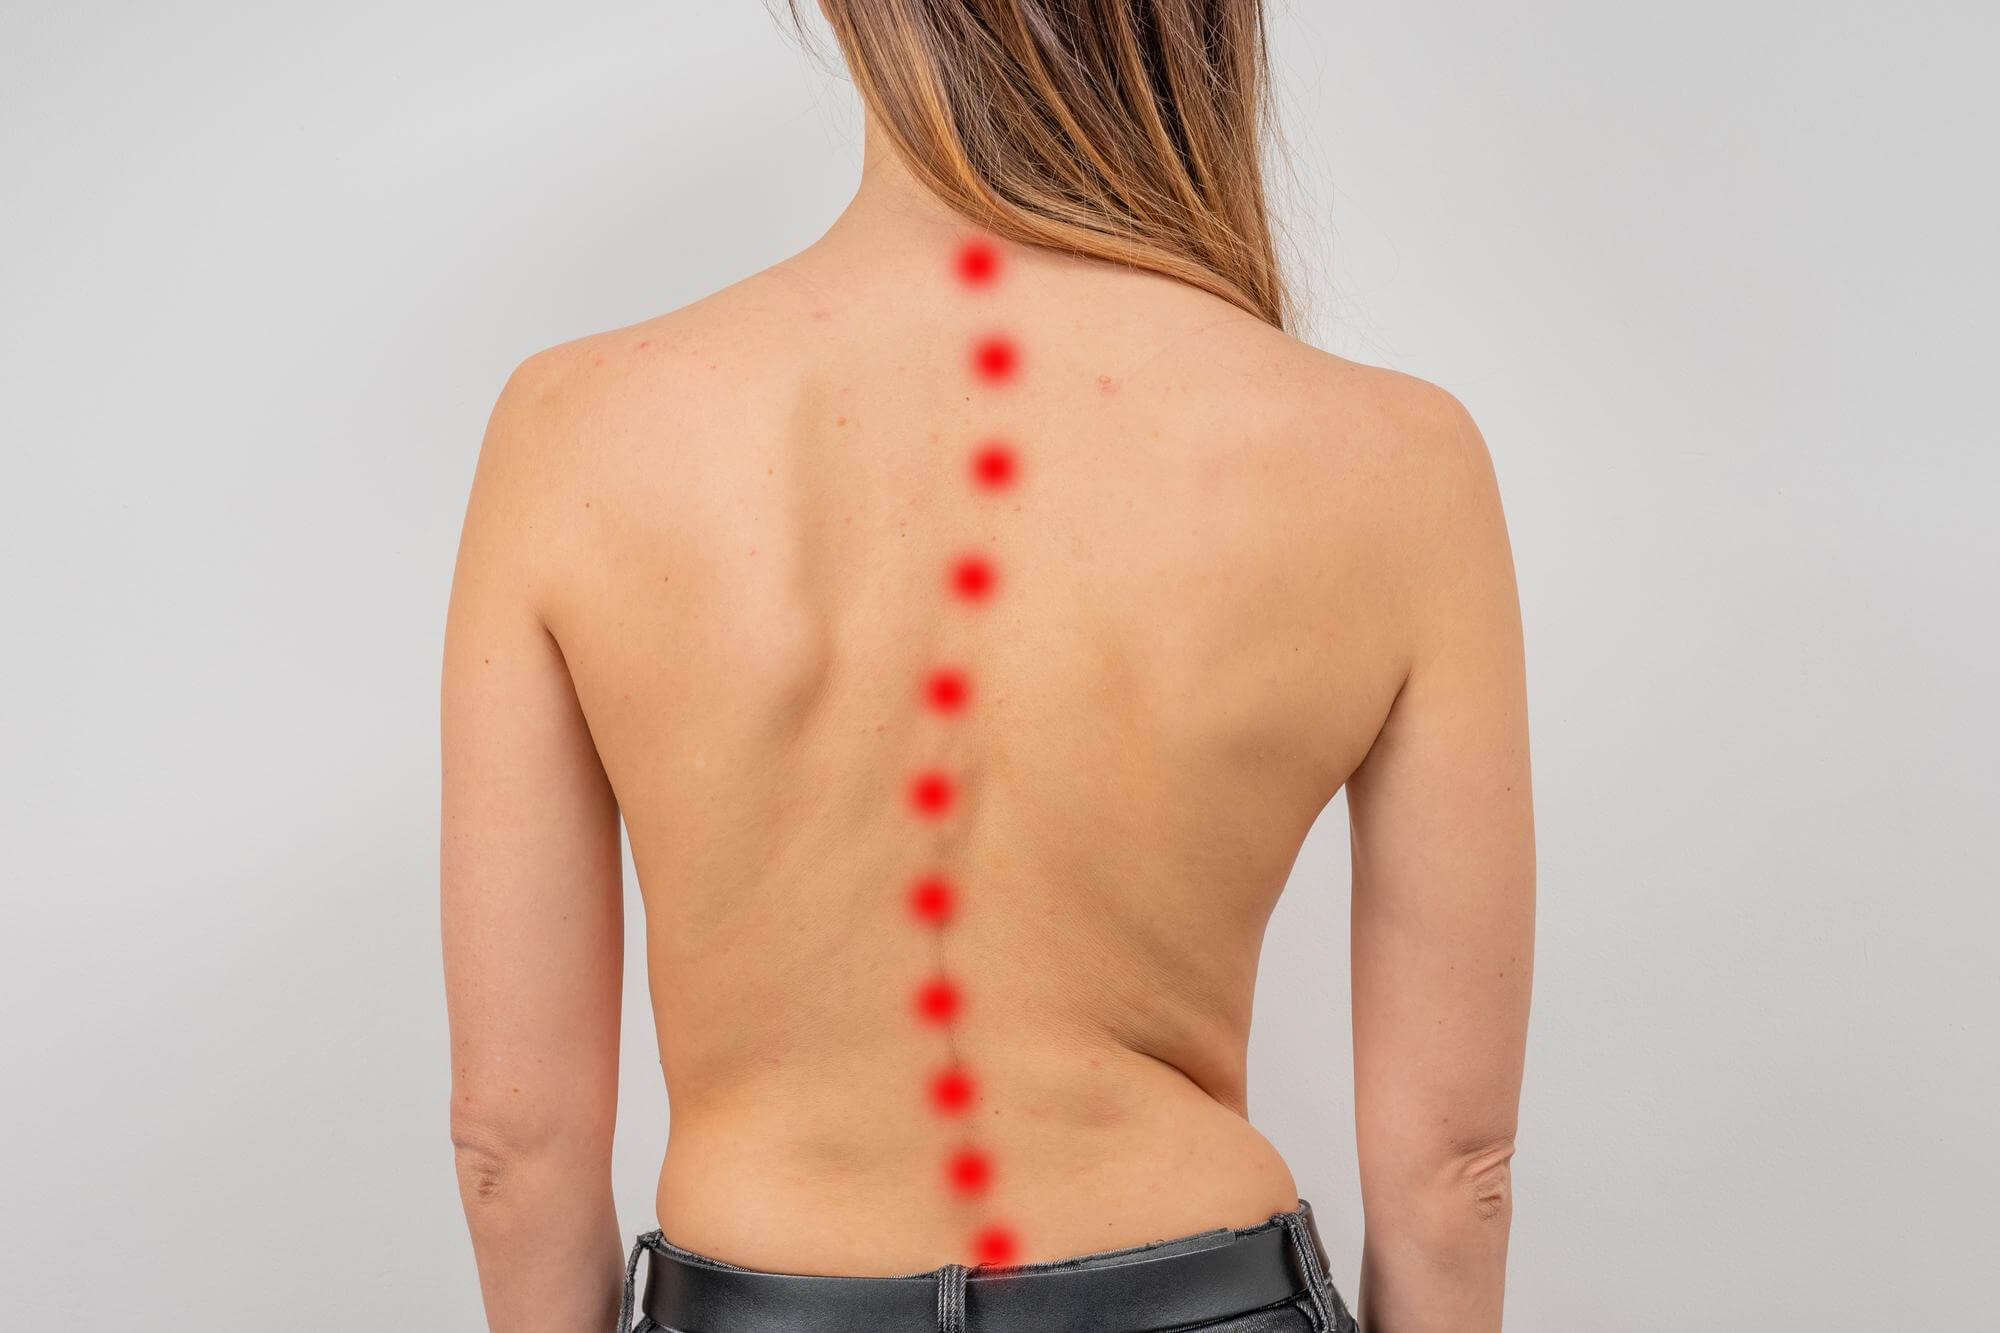 woman-with-scoliosis-spine-curved-woman-s-back-with-acne-skin (1)